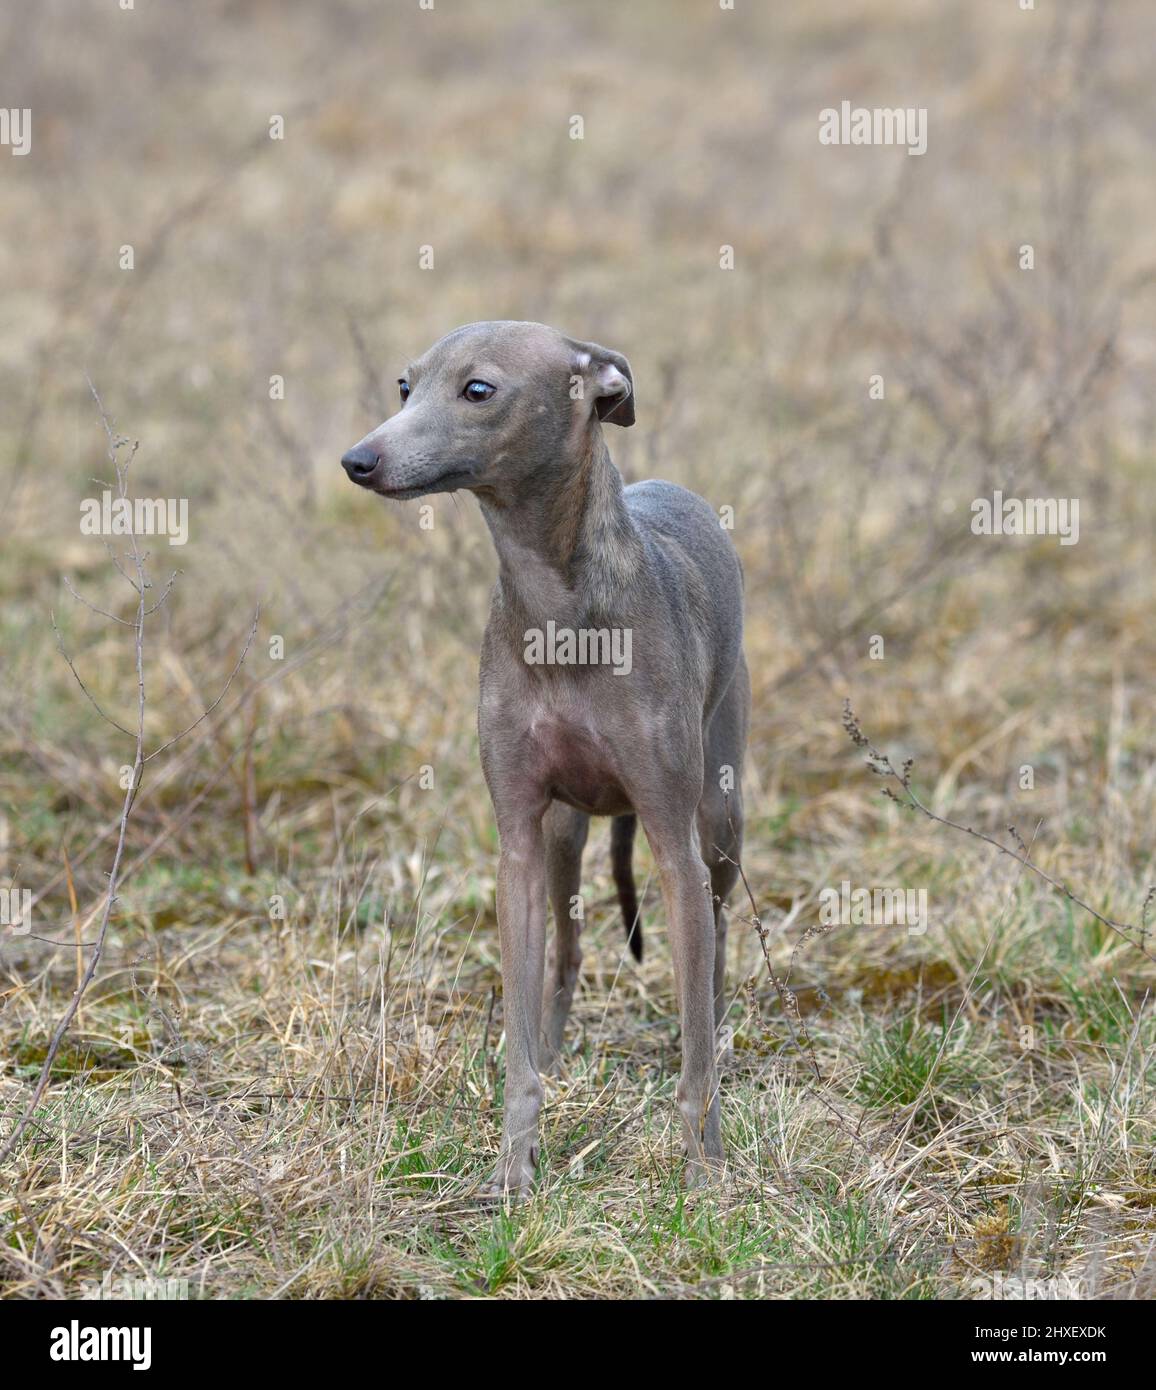 Italian Greyhound standing on a rural background Stock Photo